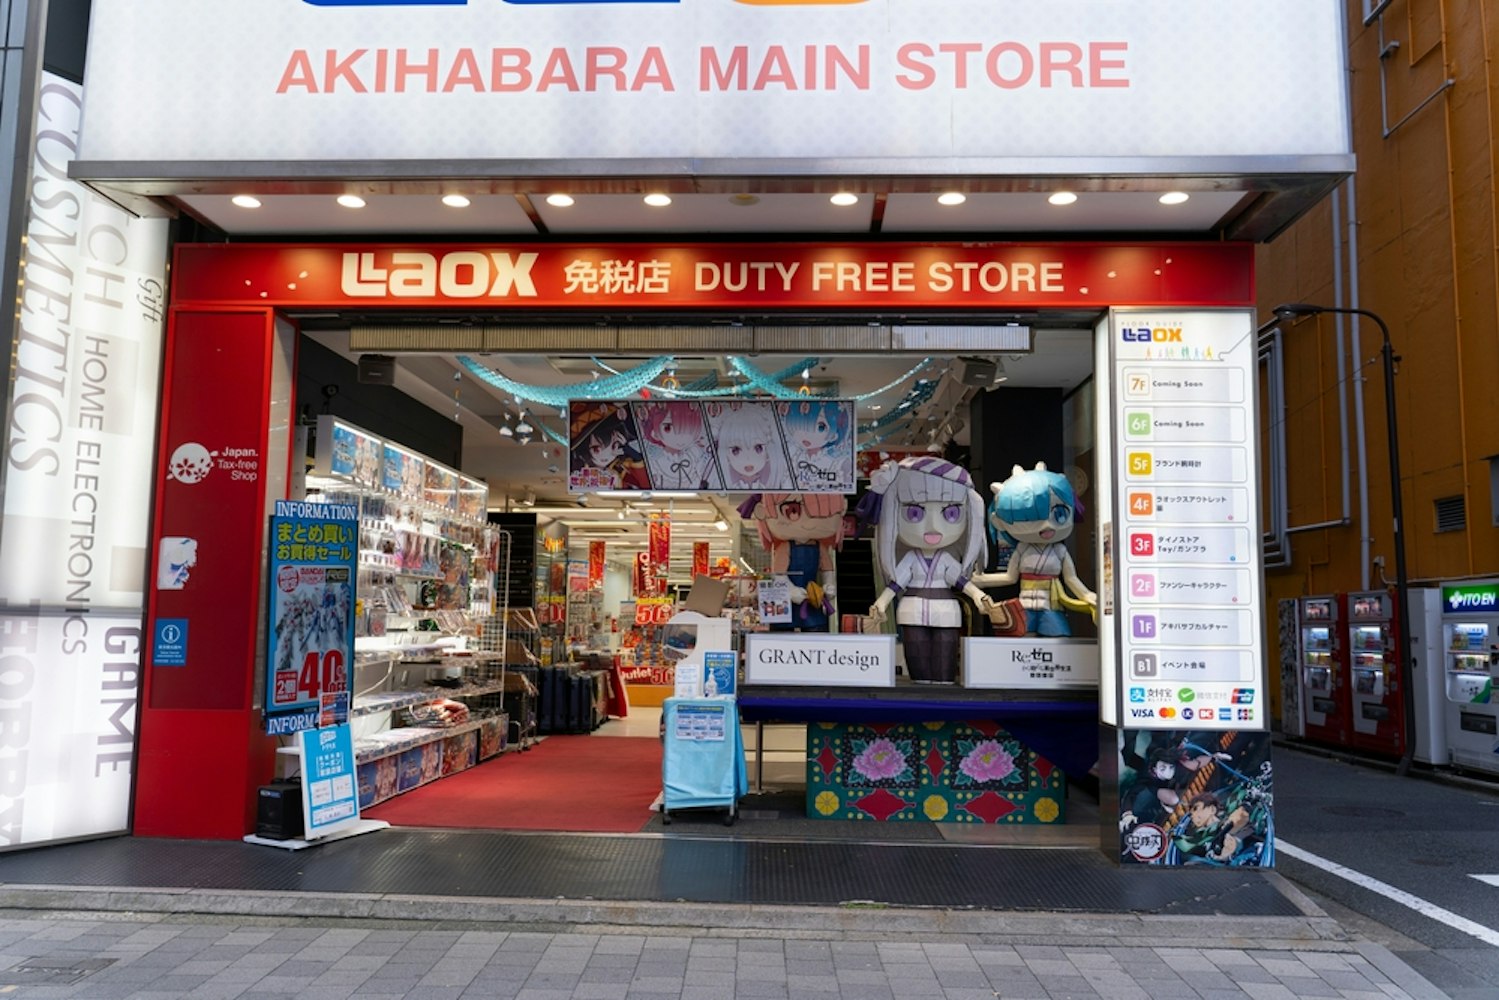 Laox store with various anime decorations